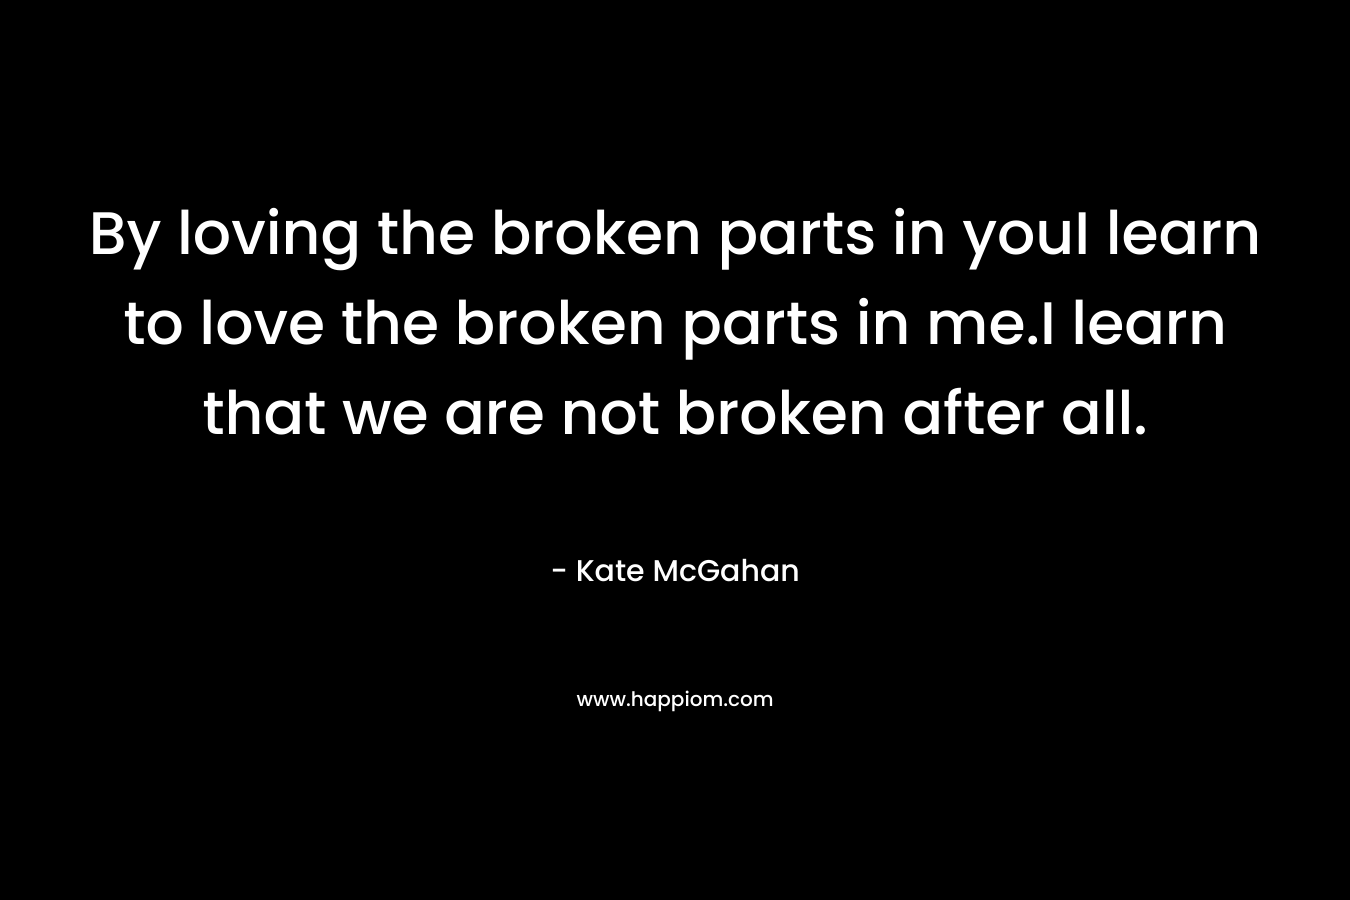 By loving the broken parts in youI learn to love the broken parts in me.I learn that we are not broken after all.